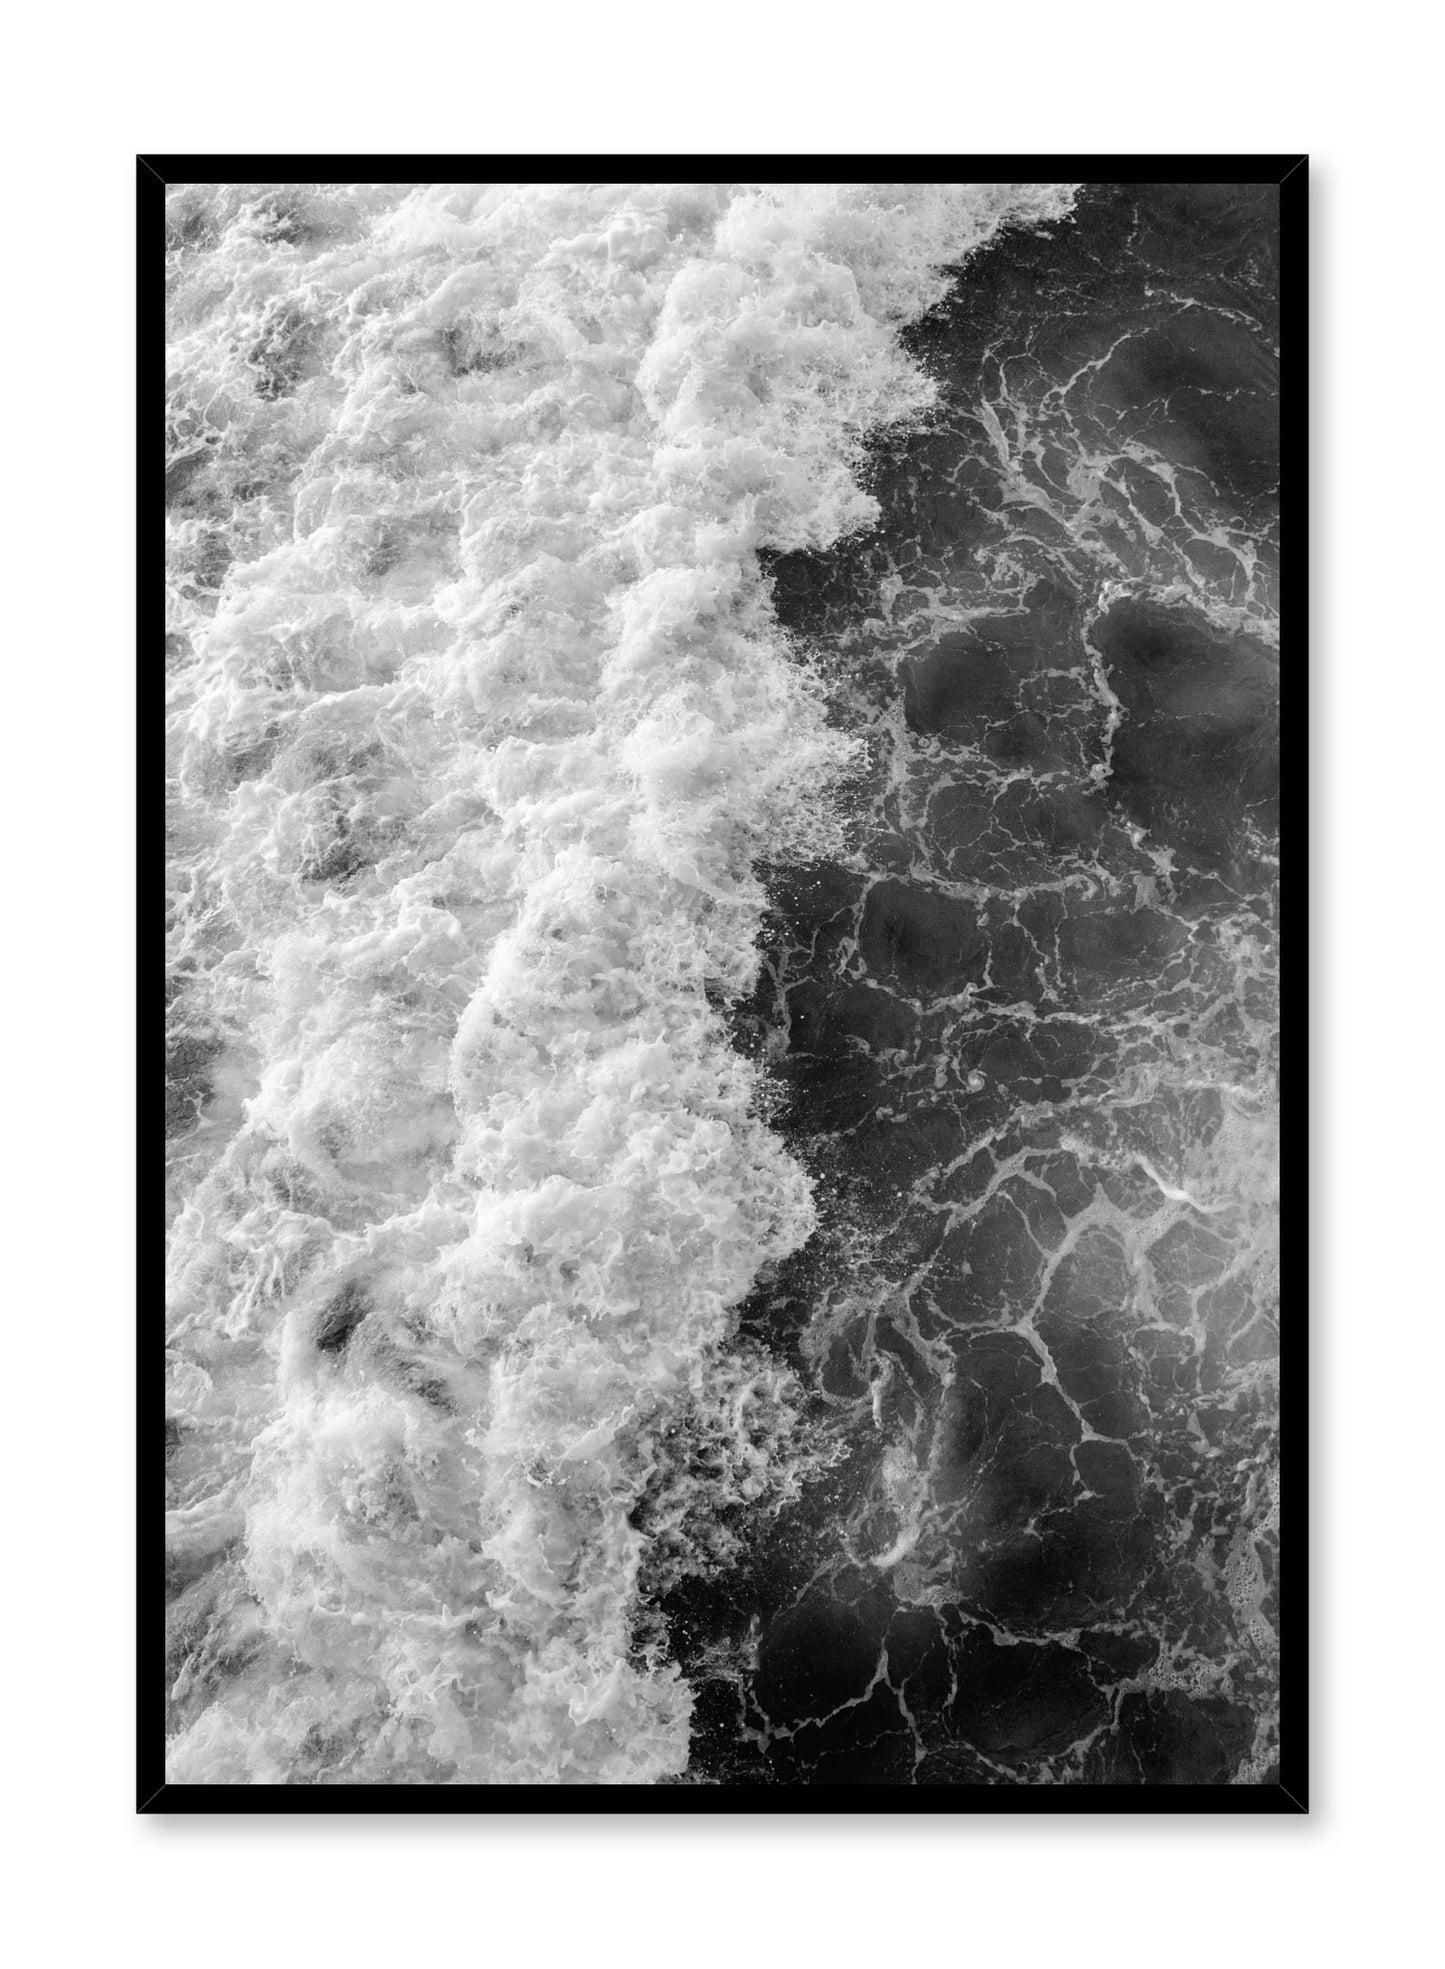 Modern minimalist poster by Opposite Wall with Emerald waters photography in black and white